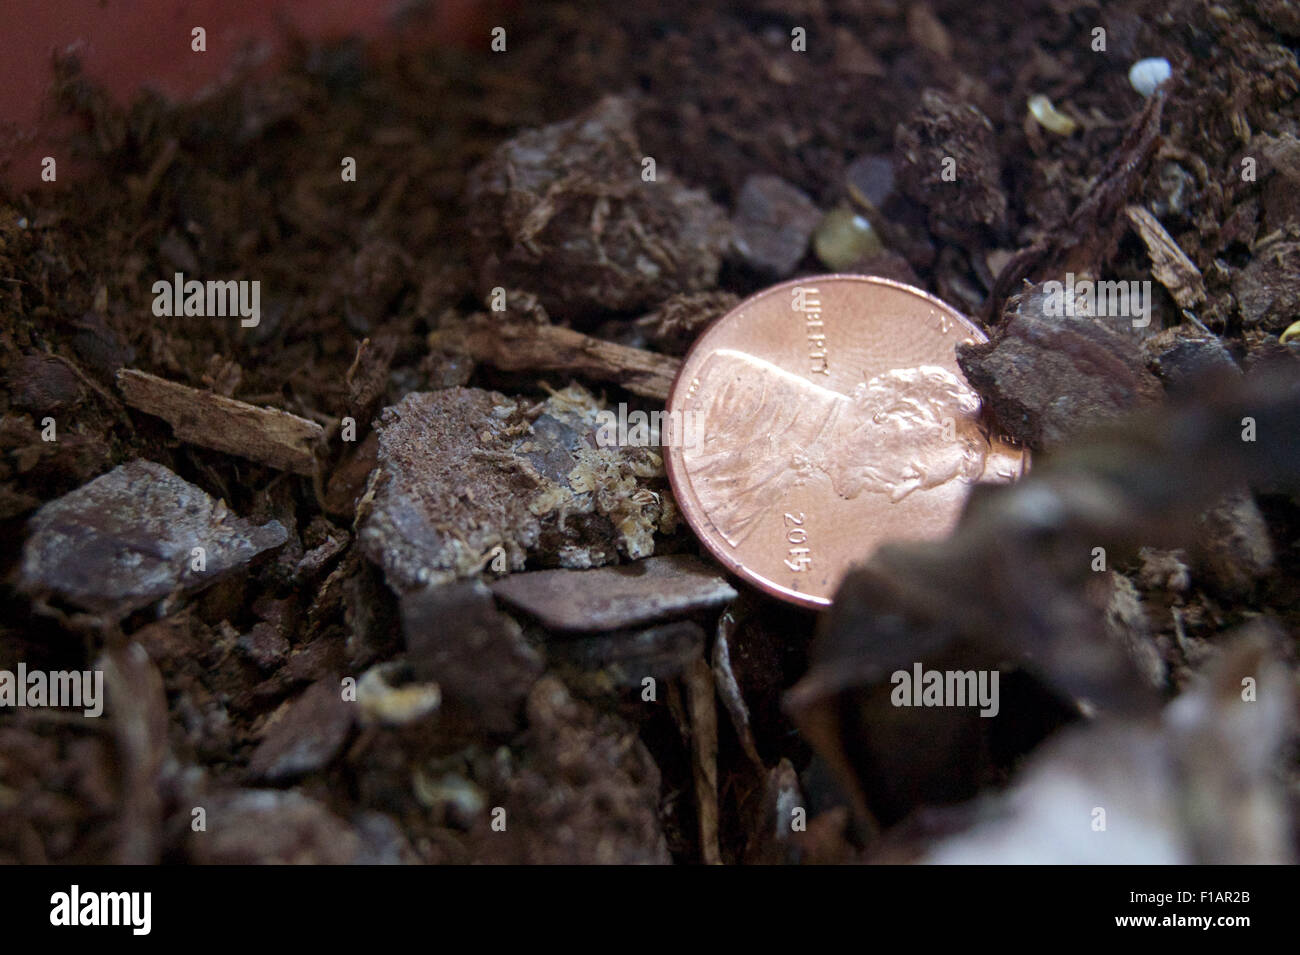 A US penny found in a flower pot. Stock Photo